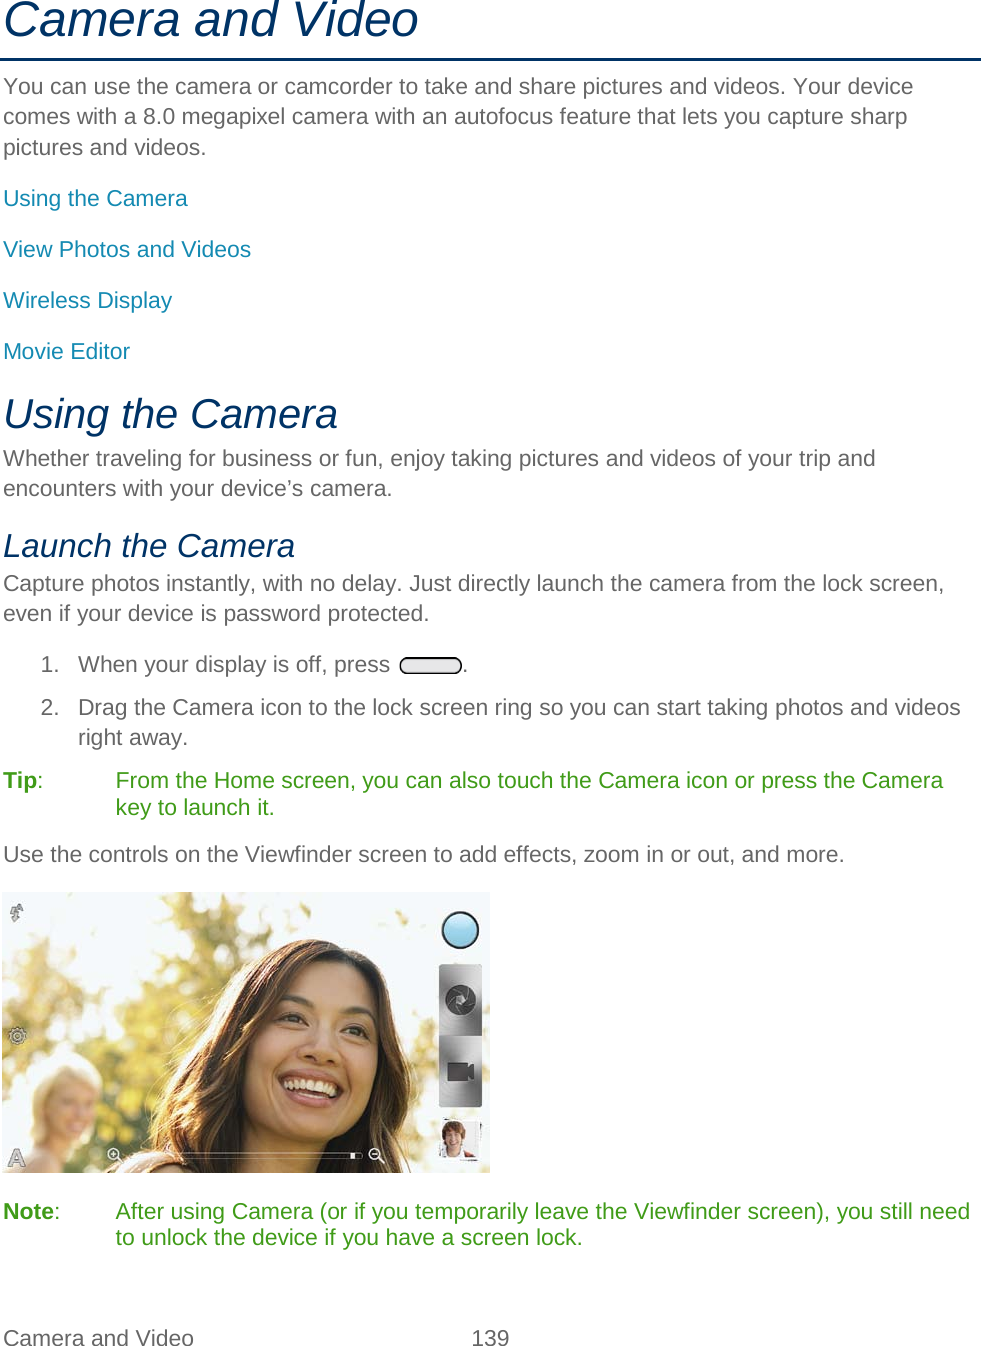  Camera and Video 139   Camera and Video You can use the camera or camcorder to take and share pictures and videos. Your device comes with a 8.0 megapixel camera with an autofocus feature that lets you capture sharp pictures and videos. Using the Camera View Photos and Videos Wireless Display Movie Editor Using the Camera Whether traveling for business or fun, enjoy taking pictures and videos of your trip and encounters with your device’s camera. Launch the Camera Capture photos instantly, with no delay. Just directly launch the camera from the lock screen, even if your device is password protected. 1. When your display is off, press  . 2. Drag the Camera icon to the lock screen ring so you can start taking photos and videos right away. Tip:  From the Home screen, you can also touch the Camera icon or press the Camera key to launch it. Use the controls on the Viewfinder screen to add effects, zoom in or out, and more.  Note:  After using Camera (or if you temporarily leave the Viewfinder screen), you still need to unlock the device if you have a screen lock. 